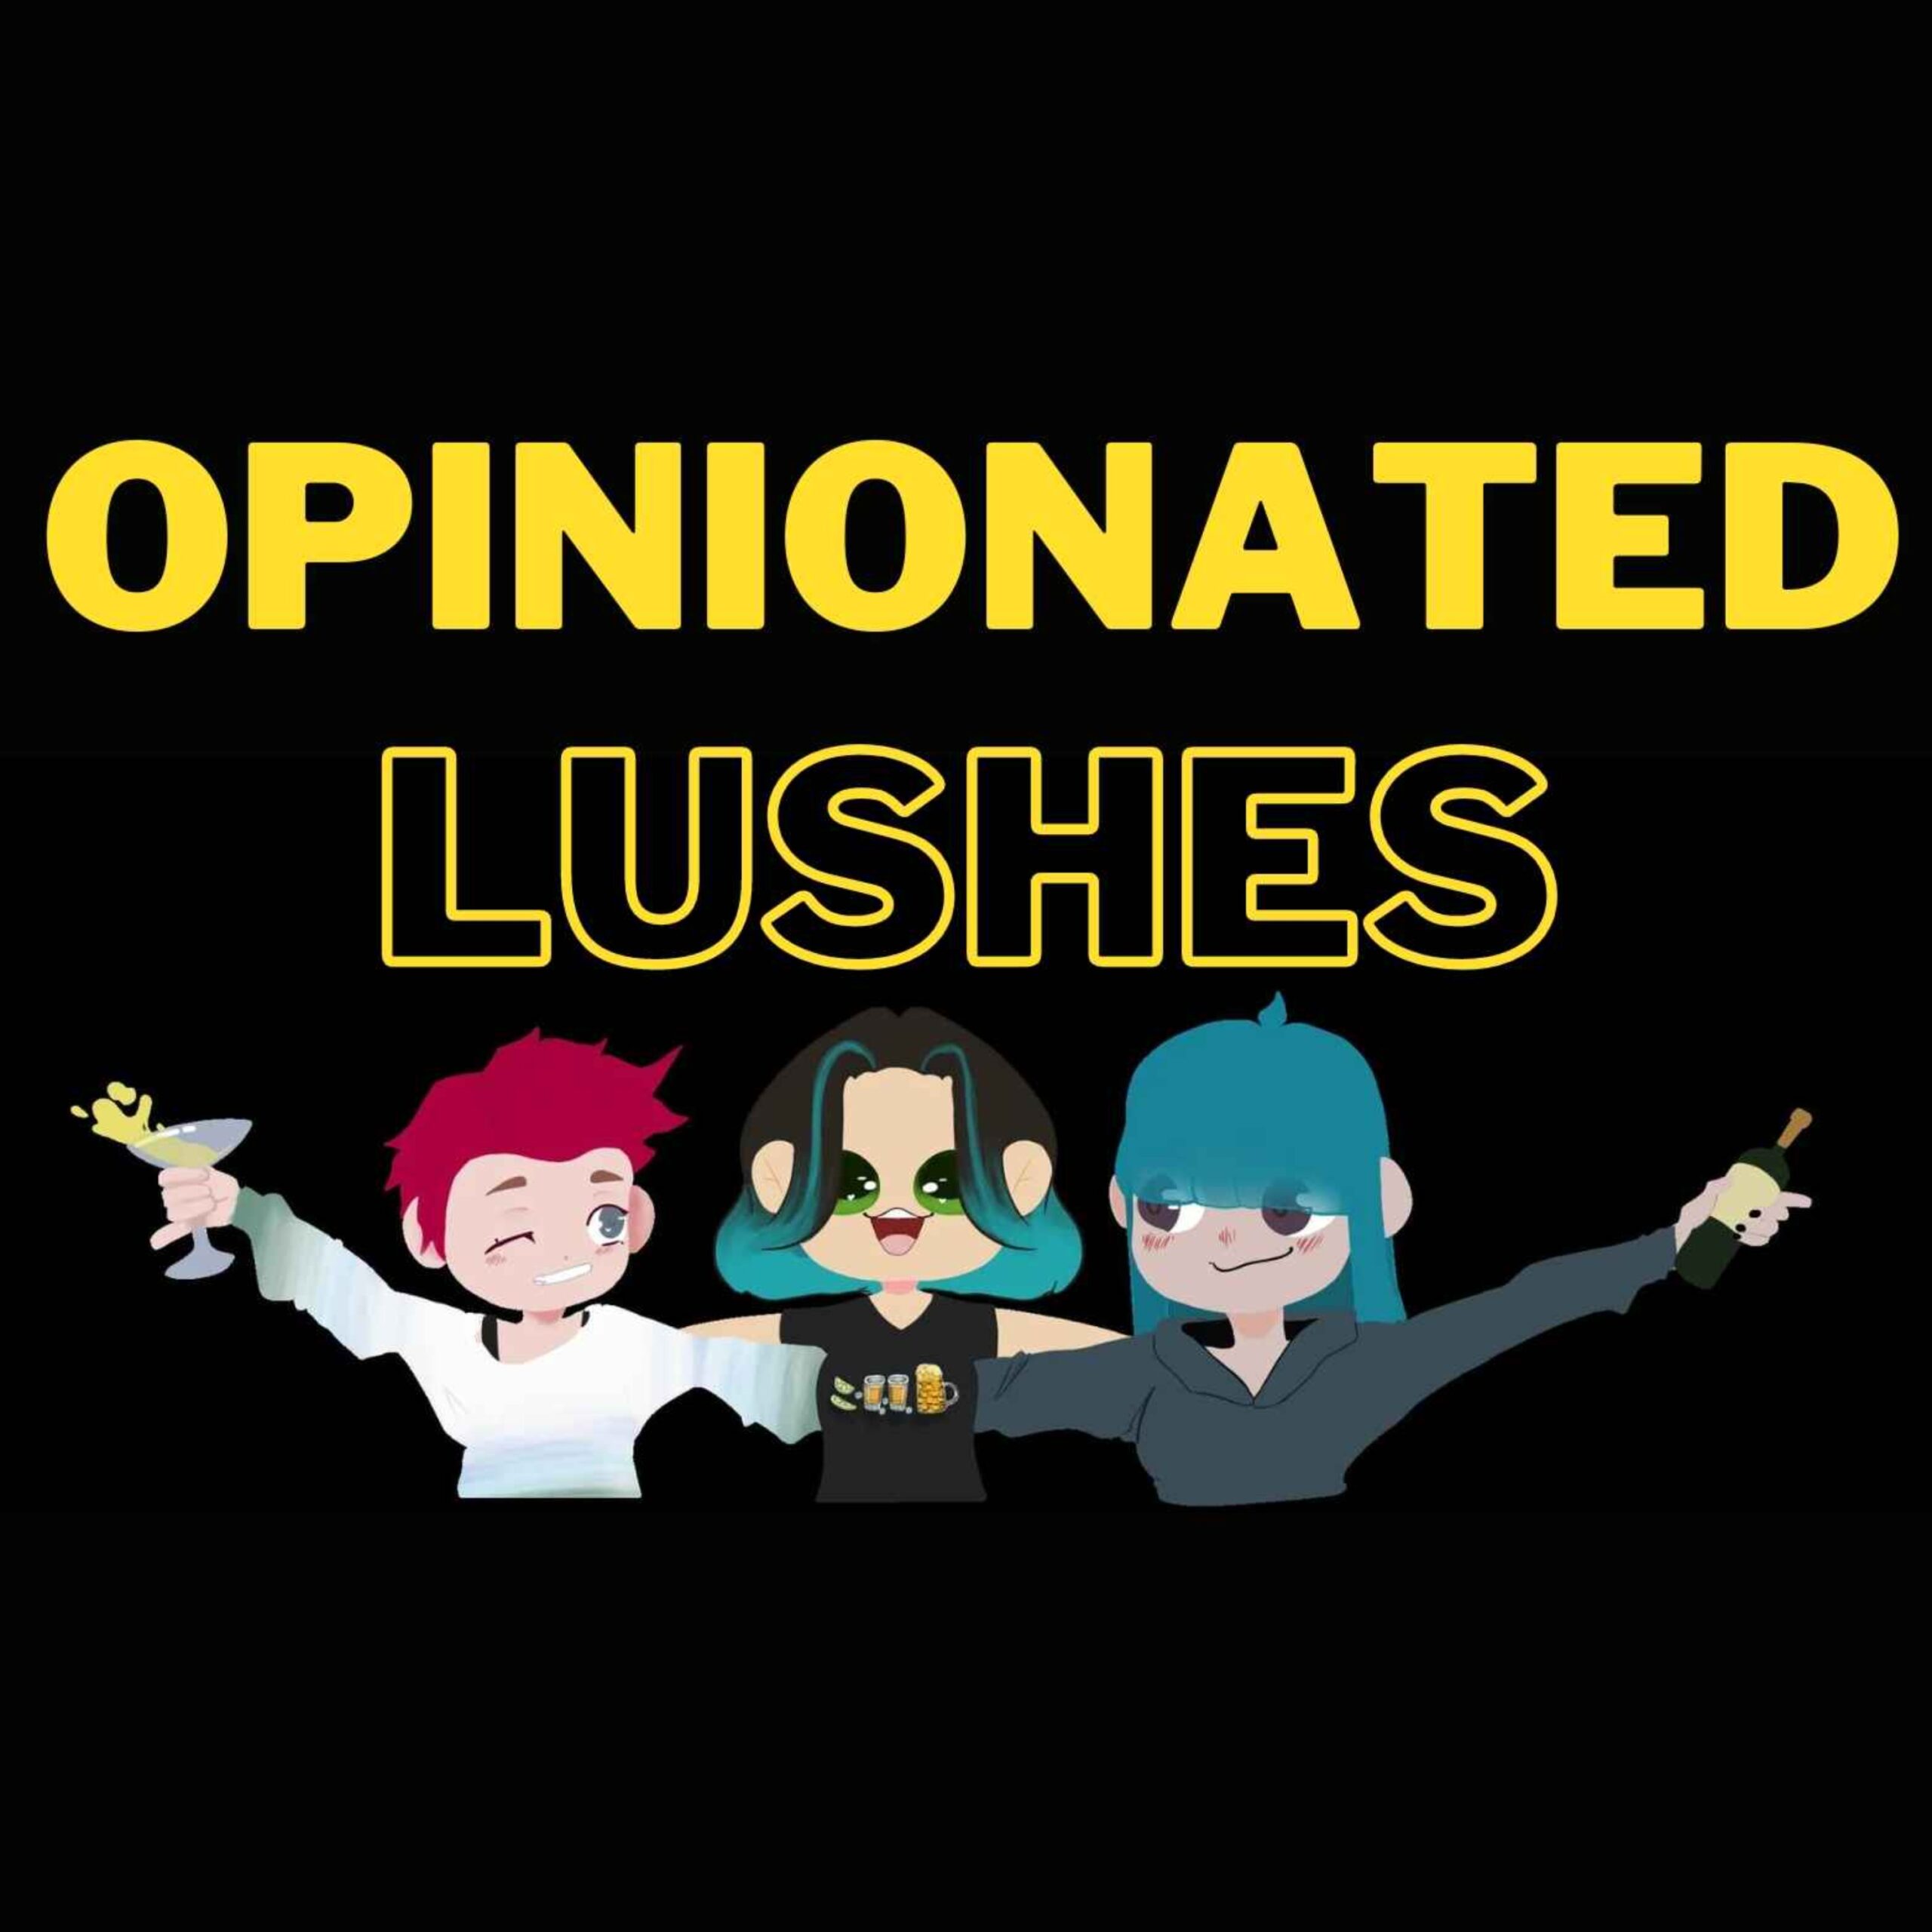 Opinionated Lushes